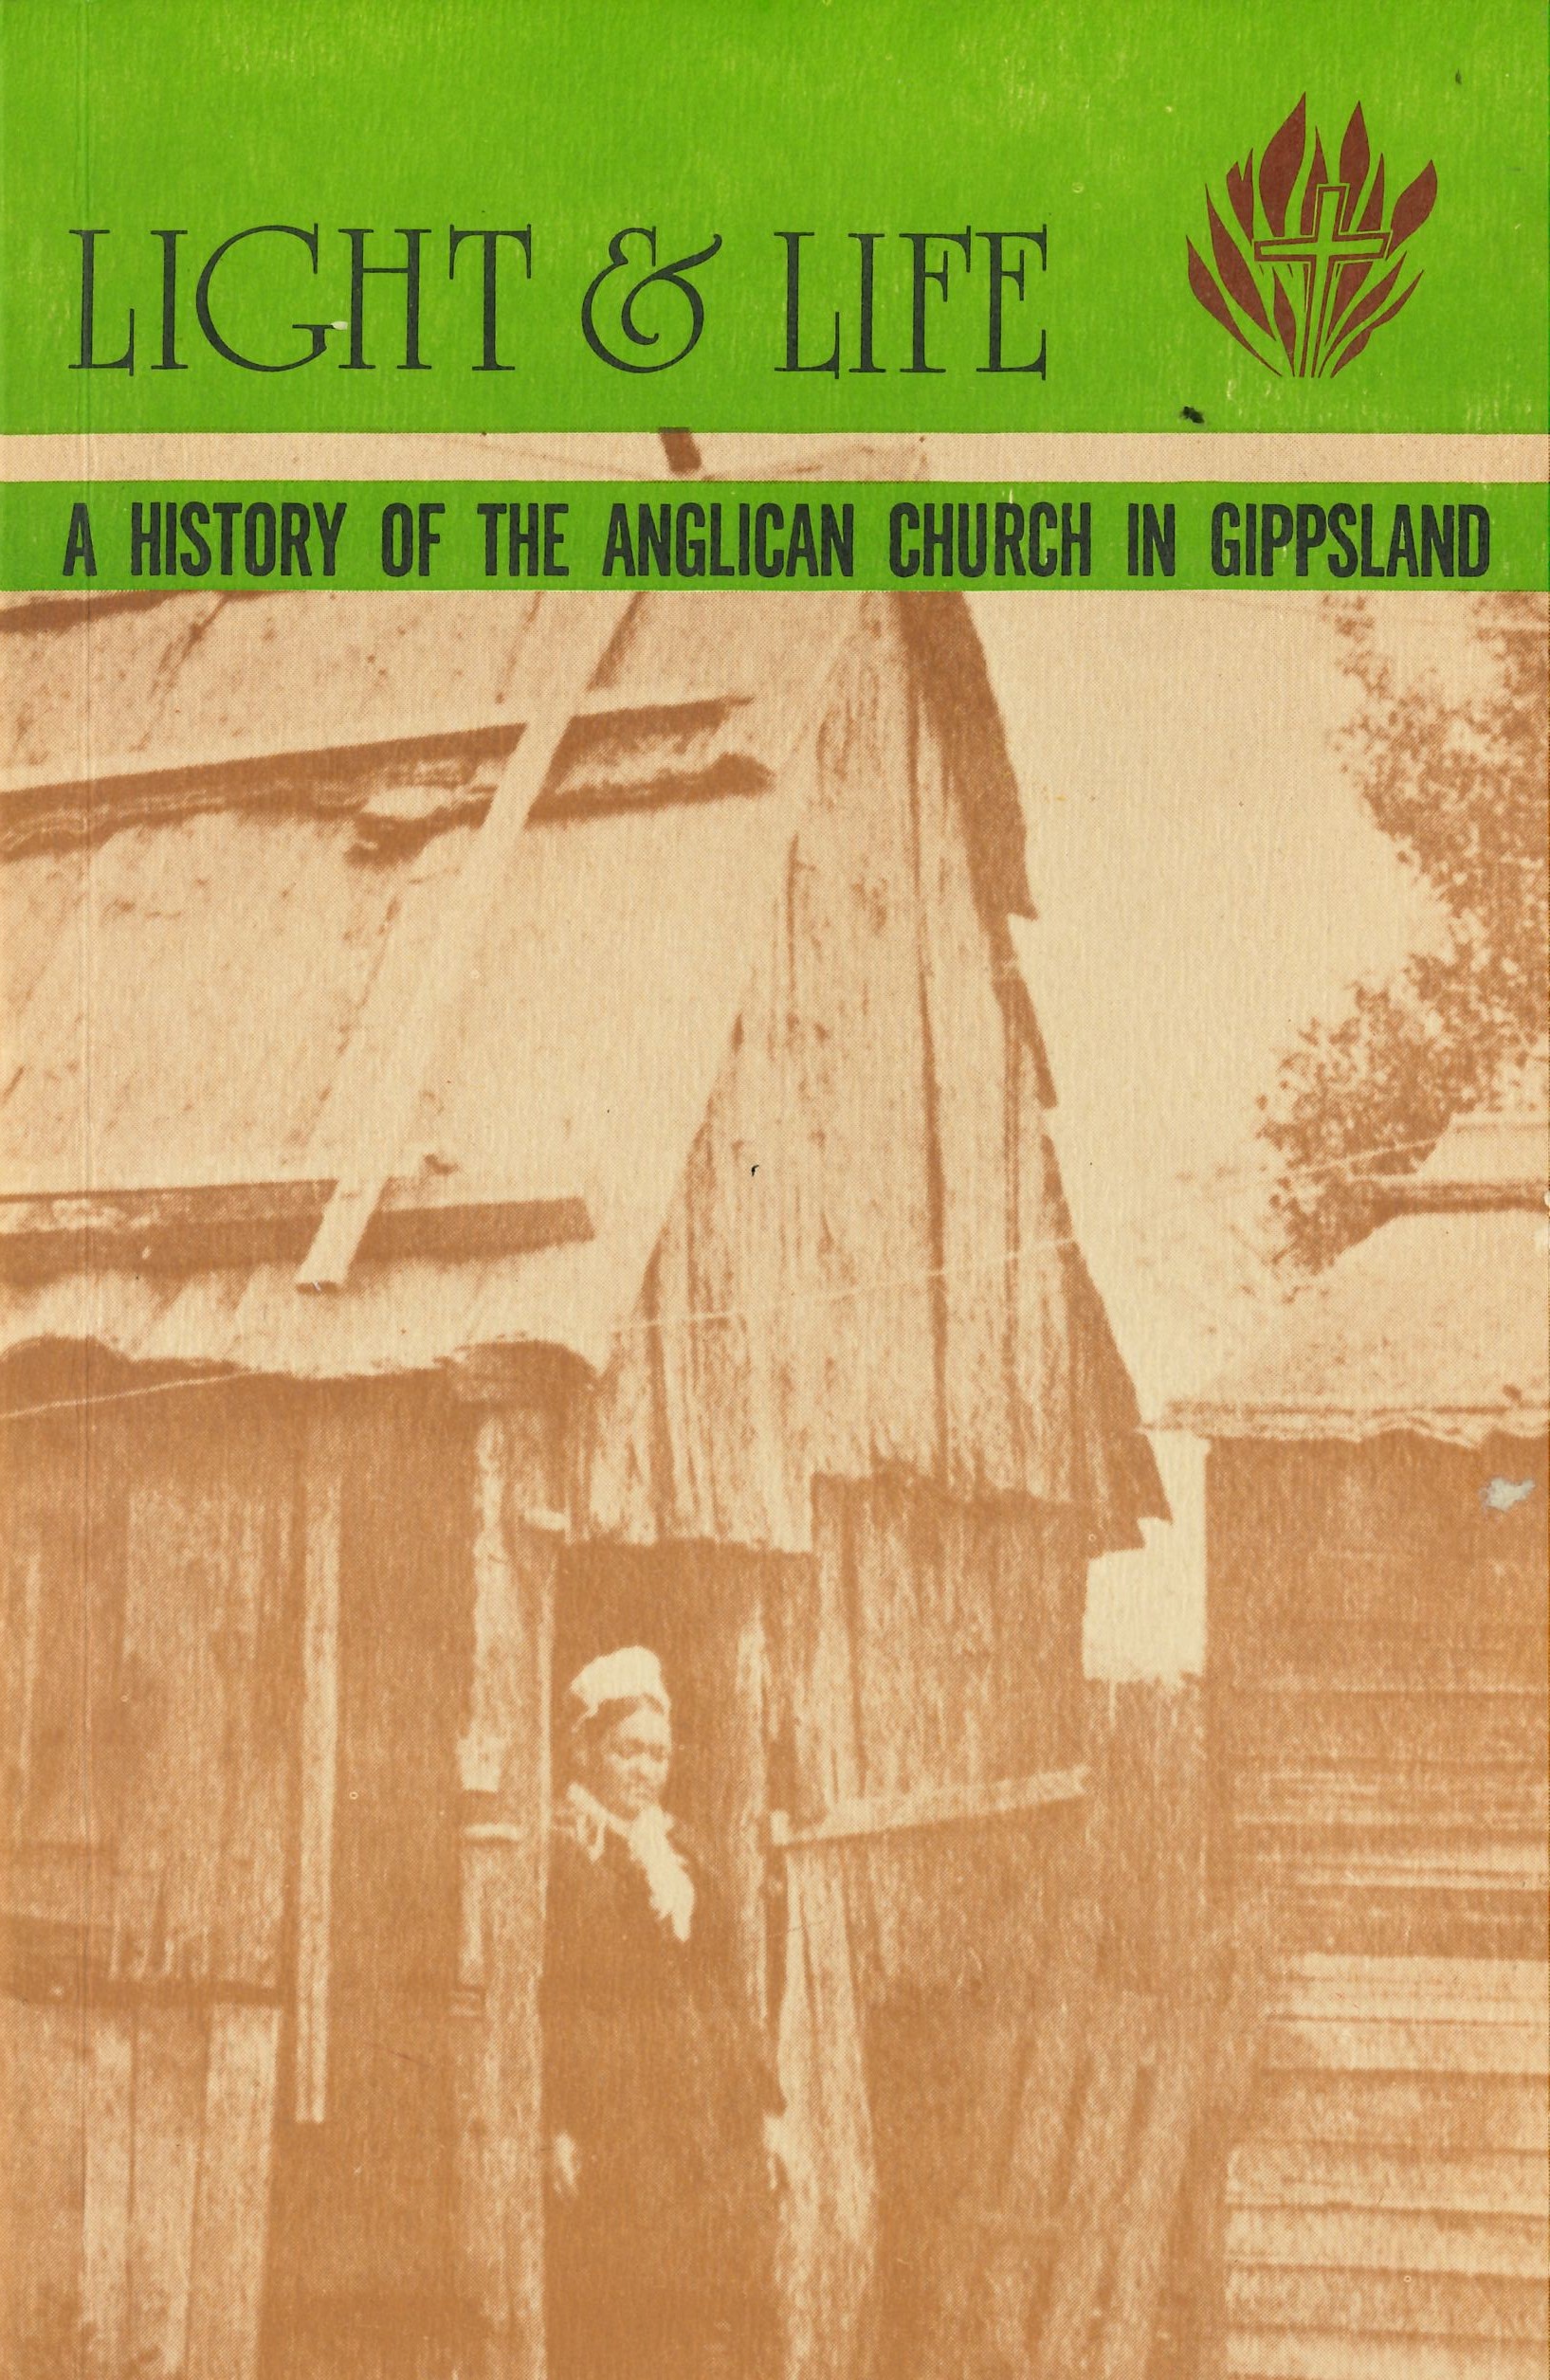 A　Life.　History　Light　the　of　Historical　Maddern　Church　by　I　Anglican　and　Society　compiled　of　T　Royal　in　Gippsland　Victoria